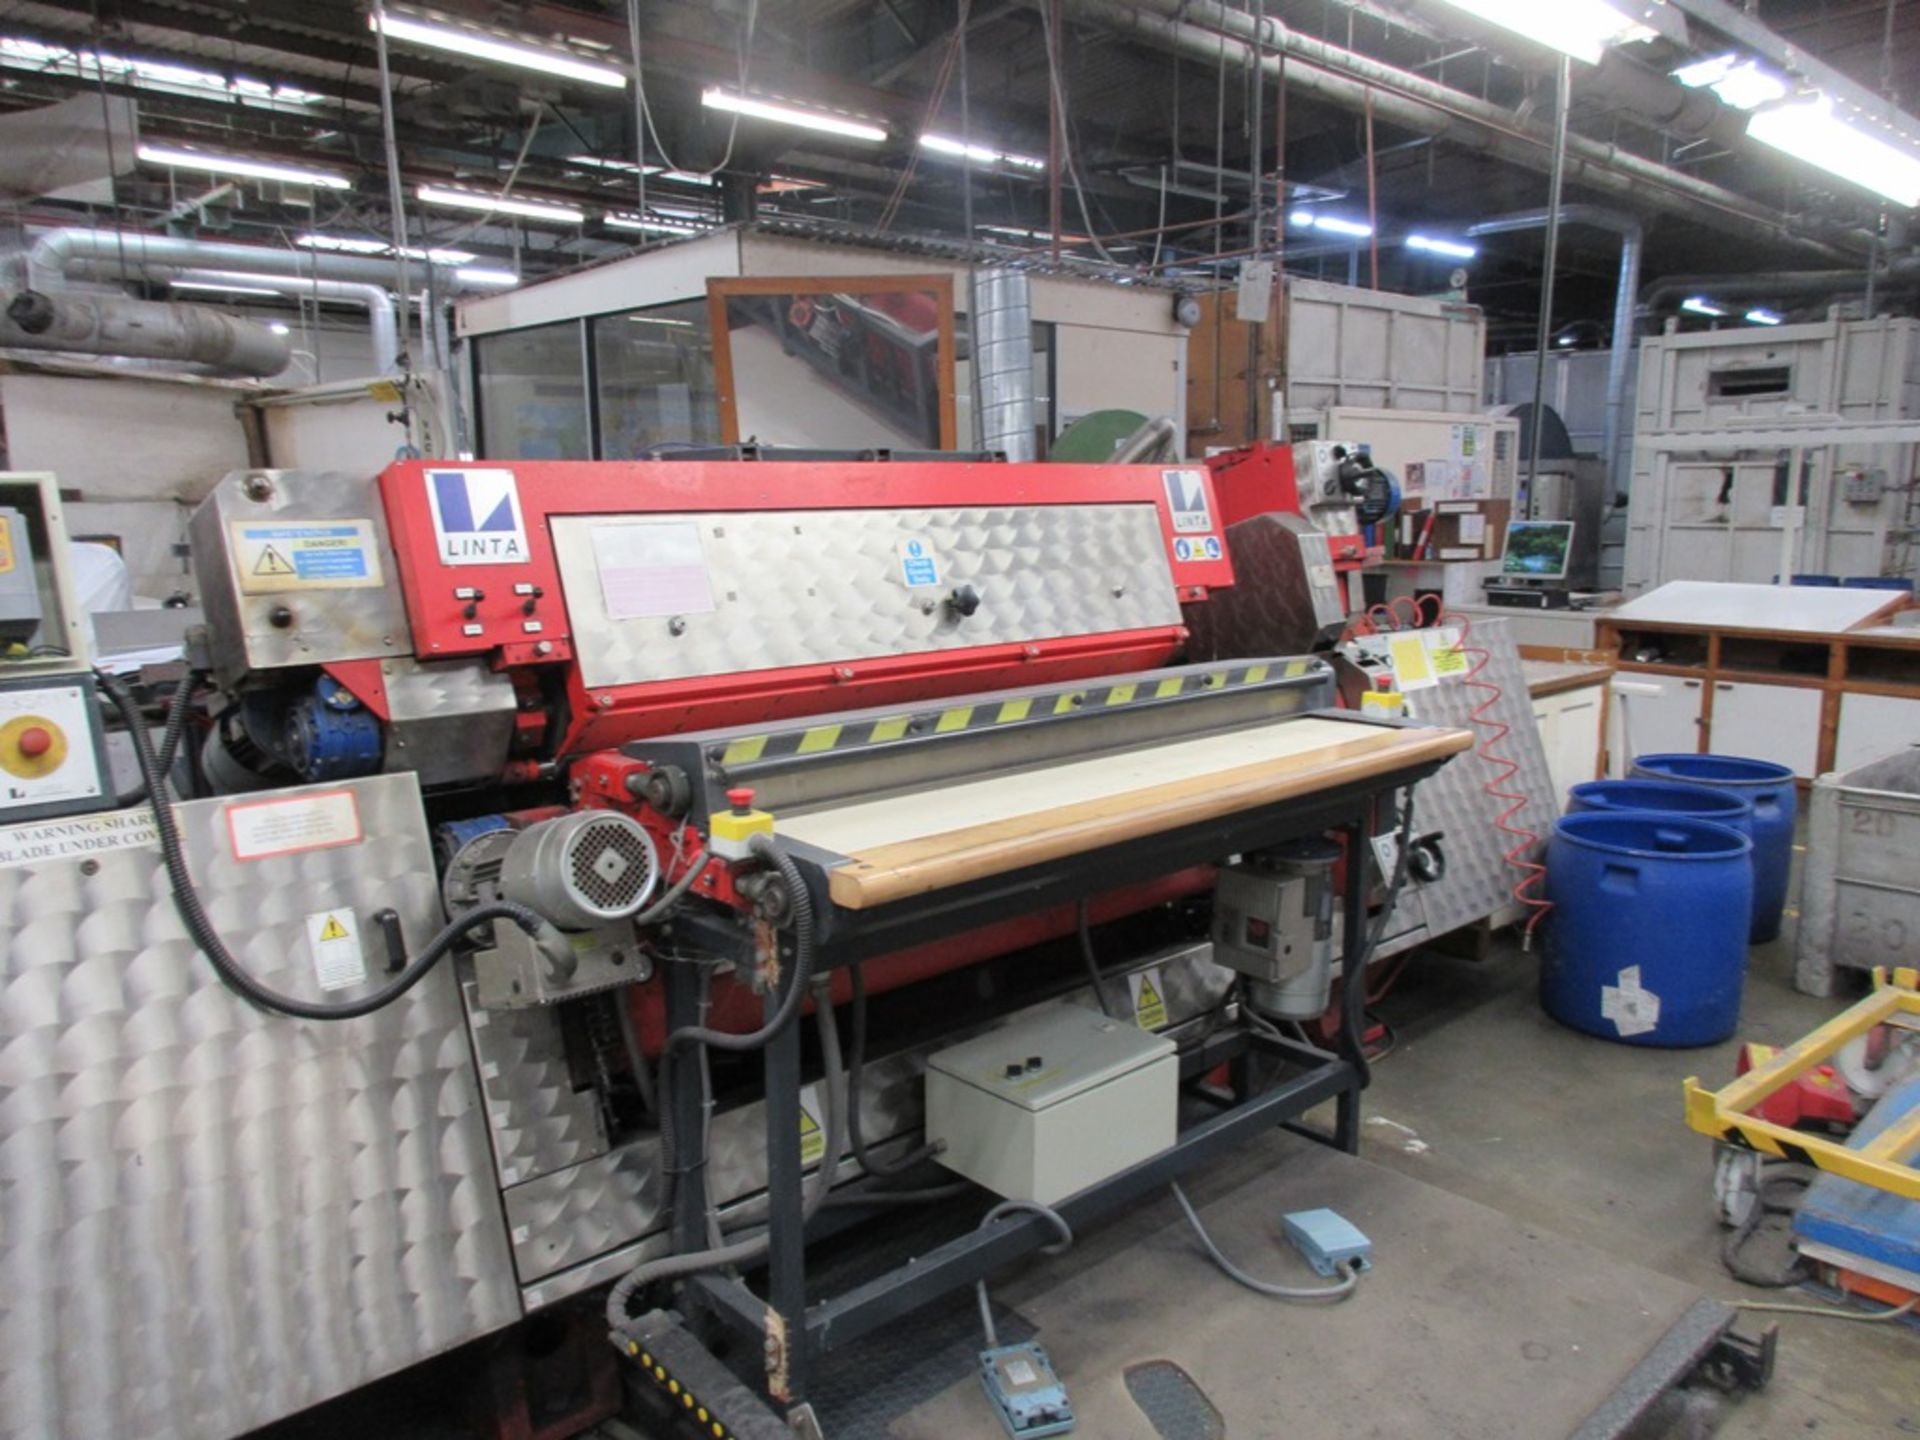 Linta Spaccatrice SL150D A151 hide splitting machine, serial no. A151 (2003), circa 1500mm width, - Image 2 of 8